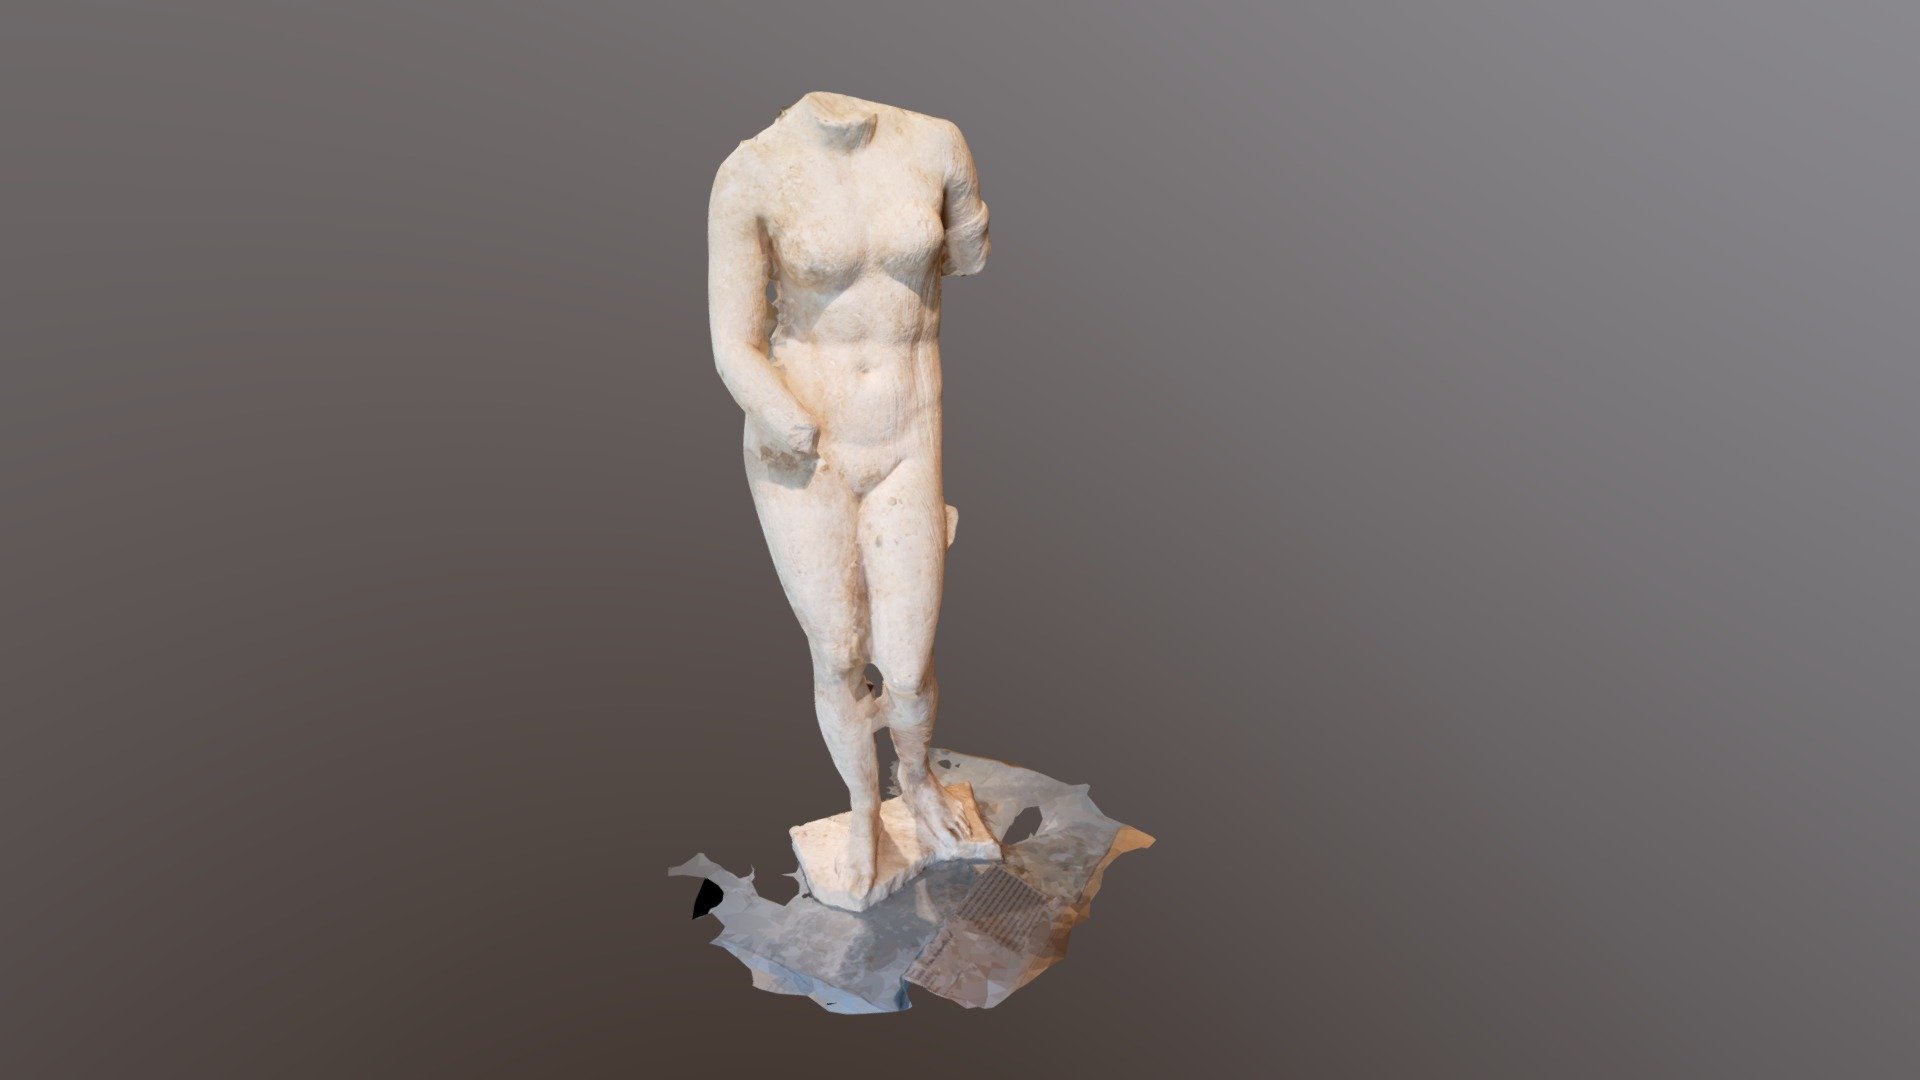 Photogrammetric reconstruction from the Art Institute of Chicago
&ldquo;This sculpture replicates the most famous Greek sculpture of a goddess, the Aphrodite of Knidos.  Carved by the sculpture Praxiteles in the fourth Century B.C. from fine marble, the original sculpture, which is no longer extant, enjoyed great reknown as the first devotional statue of a female goddess in the nude.  After causing an immediate sensation when it was installed in a sacred precint on the island of Knidos, it inspired many re-creations over the succeding centuries.  This particular copy was placed outdoors; the badly marred surface is the result of prolonged exposure to the elements